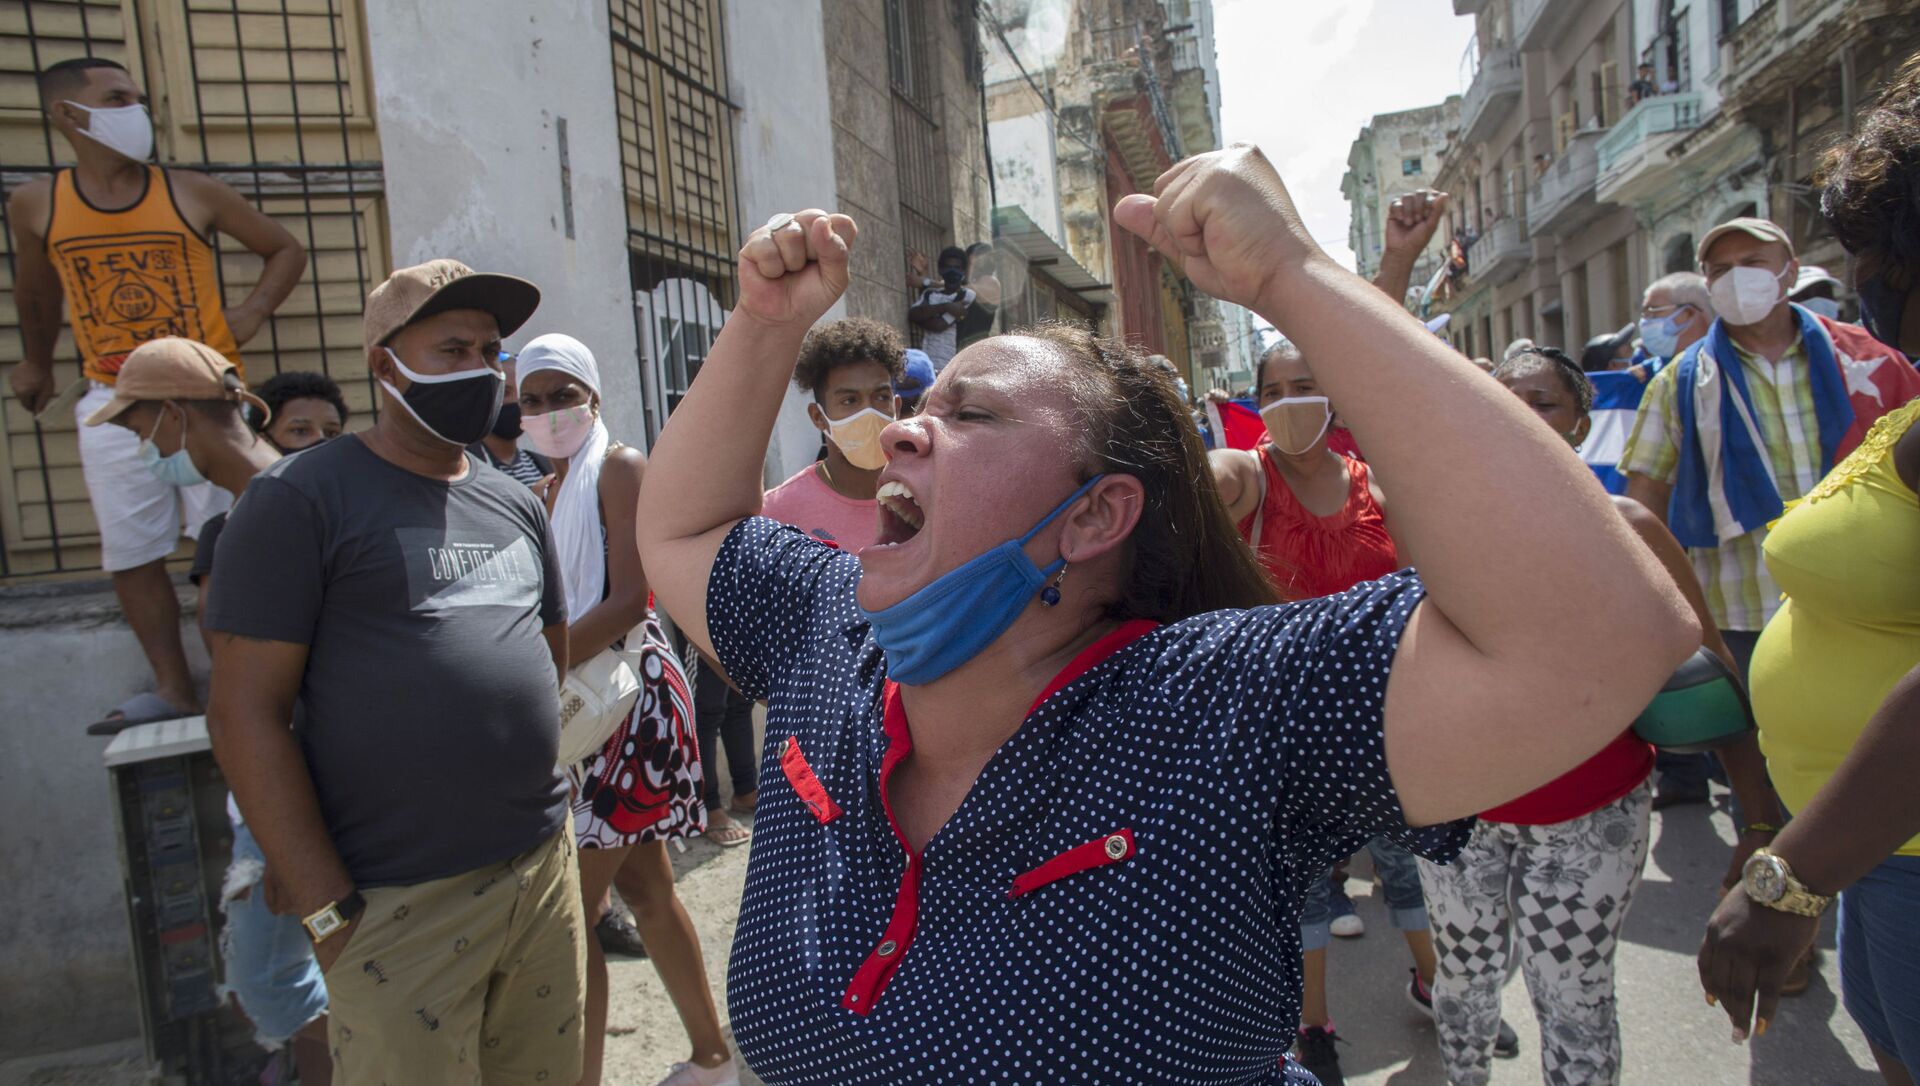 A woman shouts pro-government slogans as anti-government protesters march in Havana, Cuba, Sunday, July 11, 2021 - Sputnik International, 1920, 12.07.2021